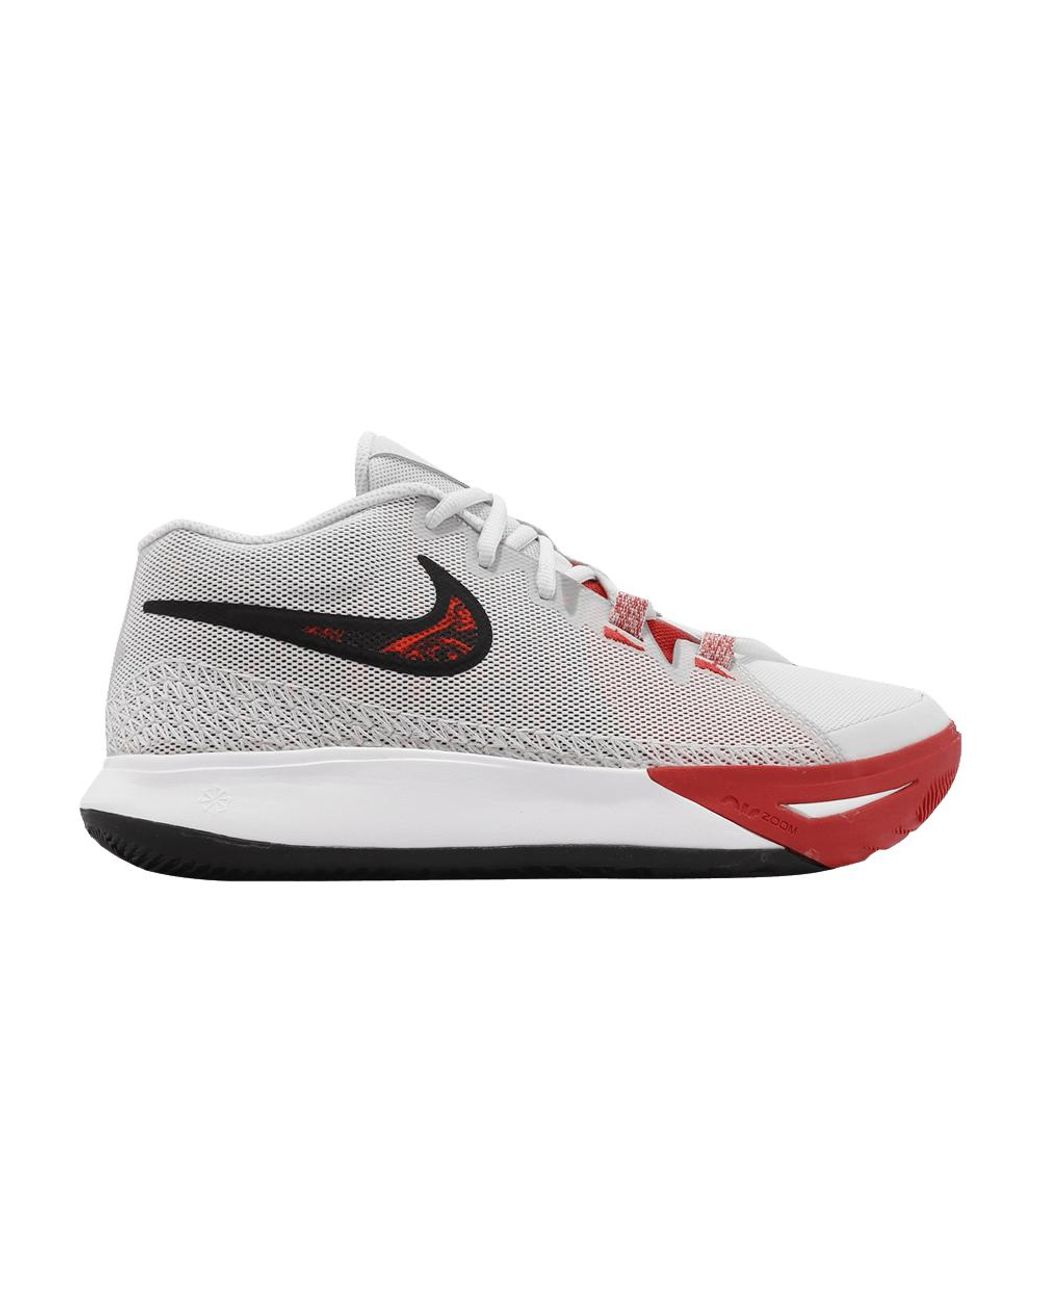 Nike Kyrie Flytrap 6 Ep 'photon Dust University Red' in White for